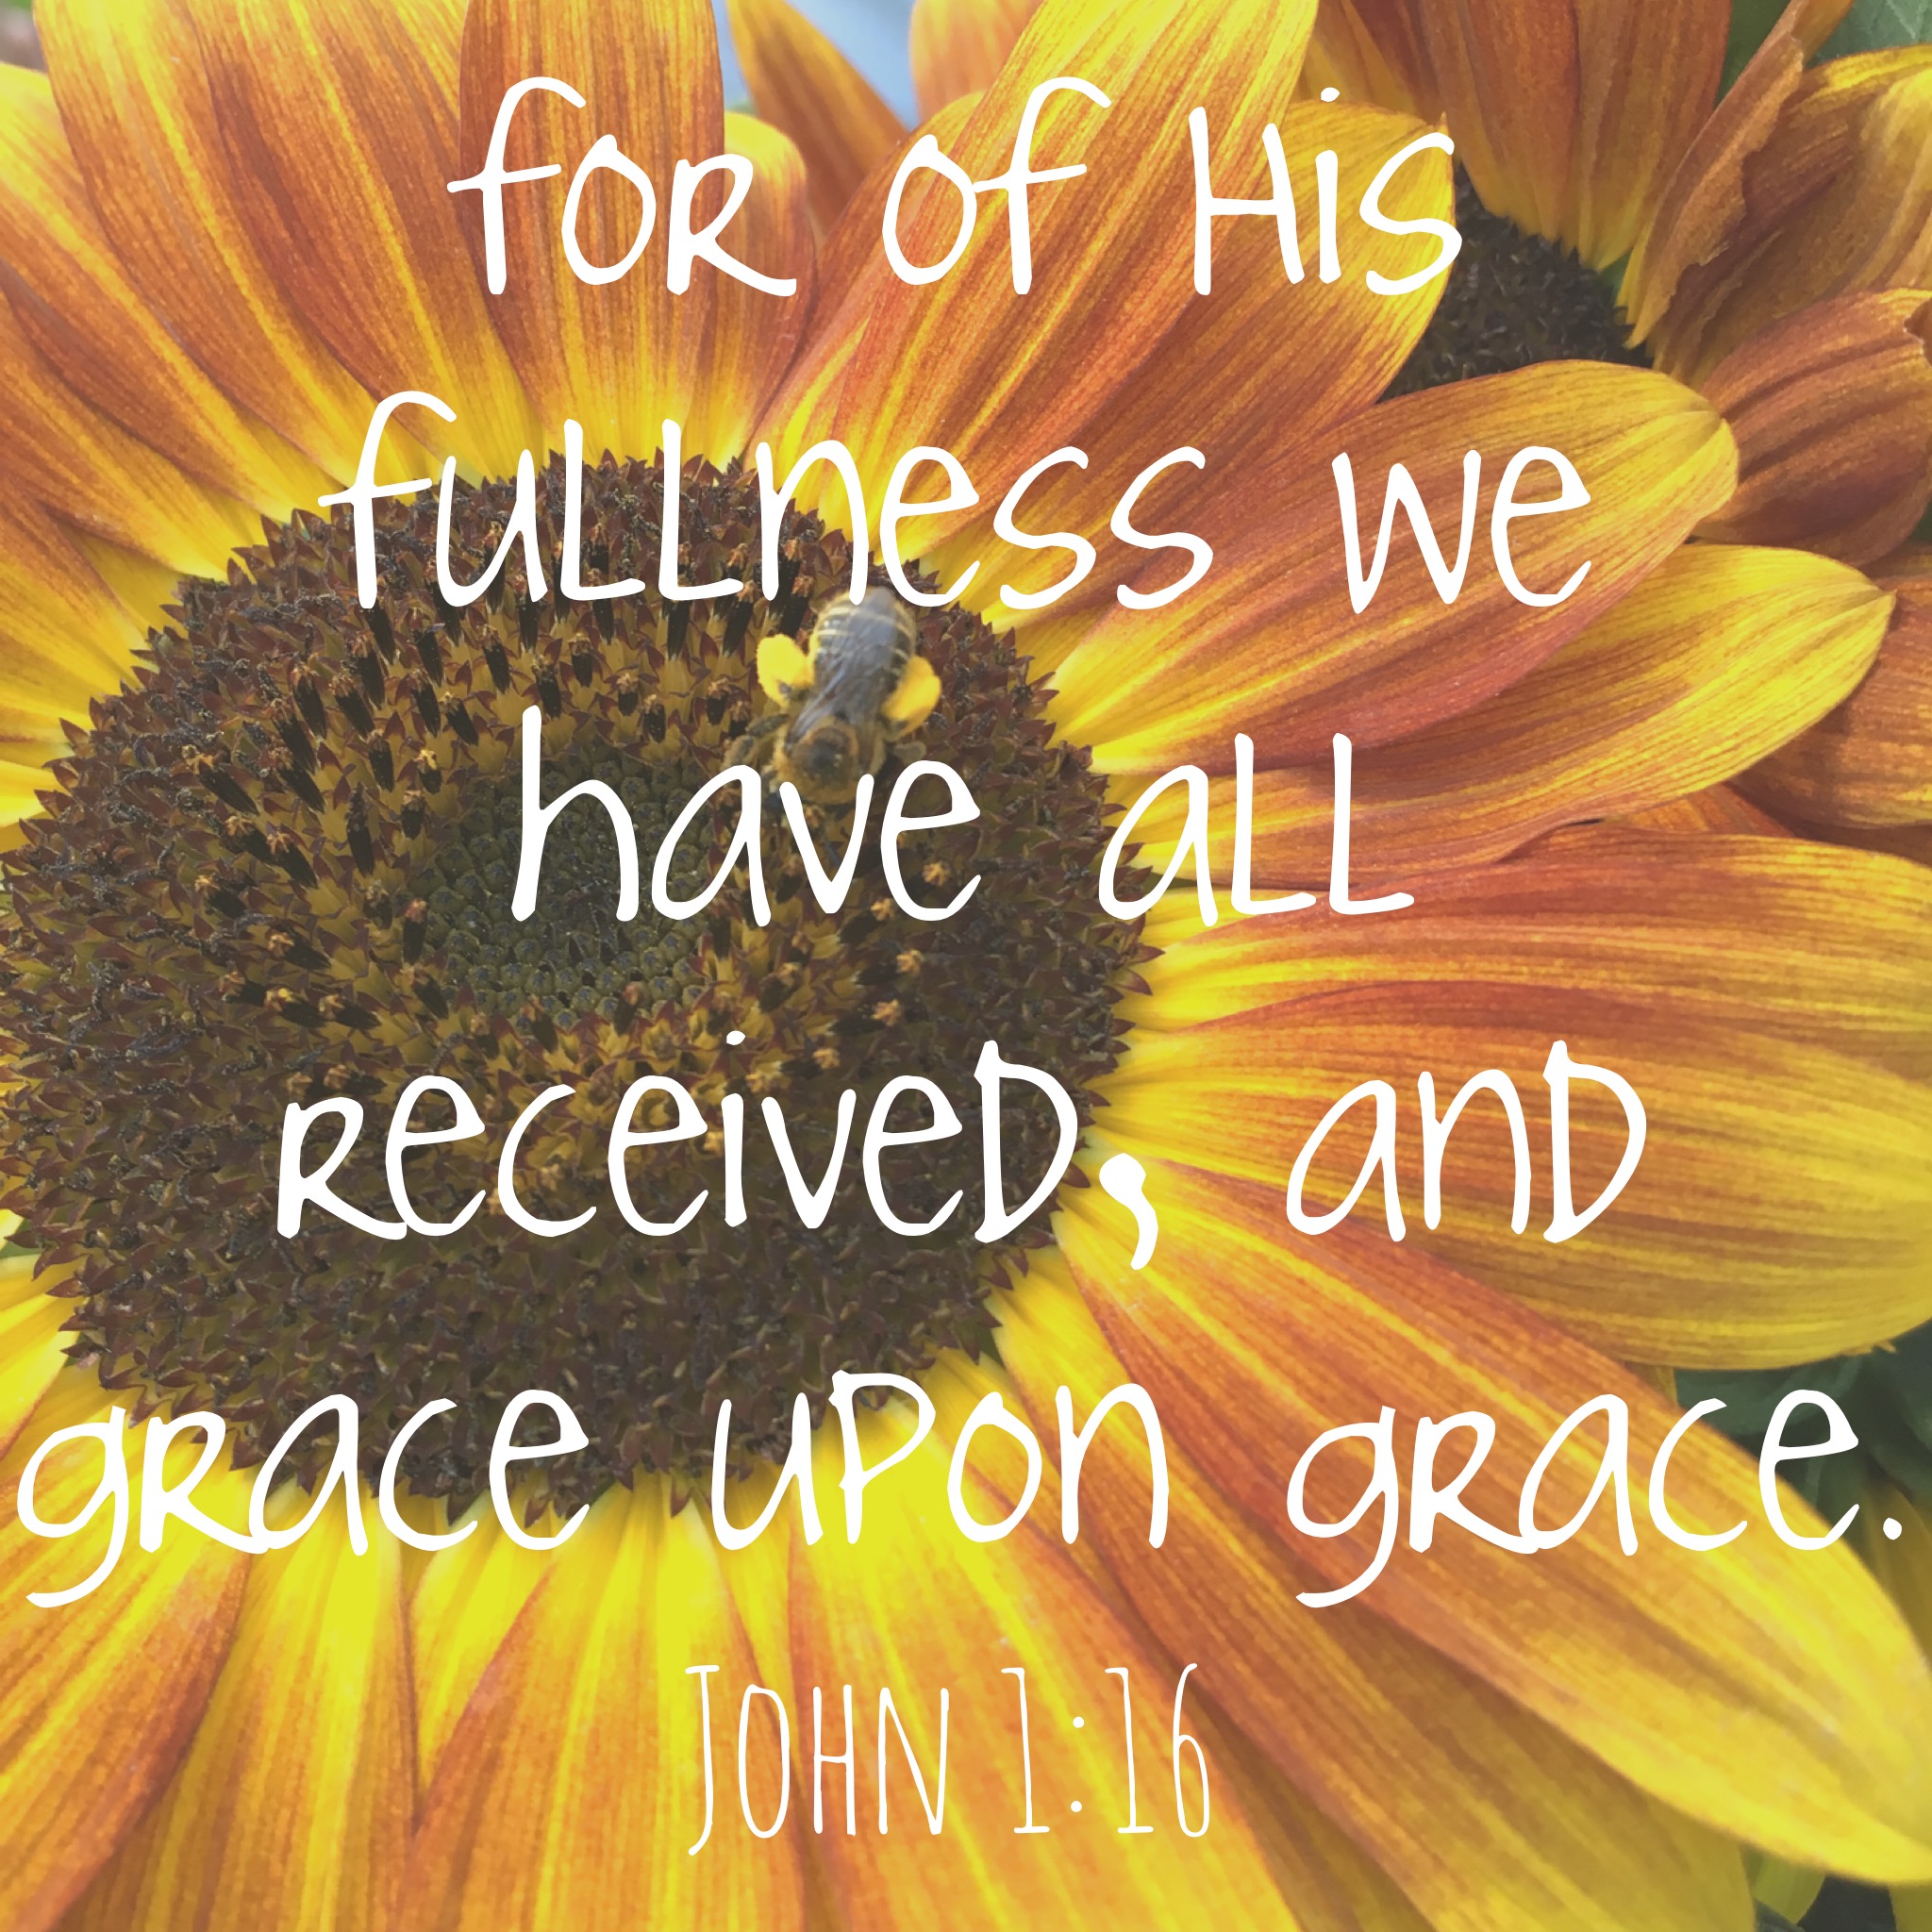 Recipe for Life Cards Week 3 John 1:16 Grace From the Family With Love